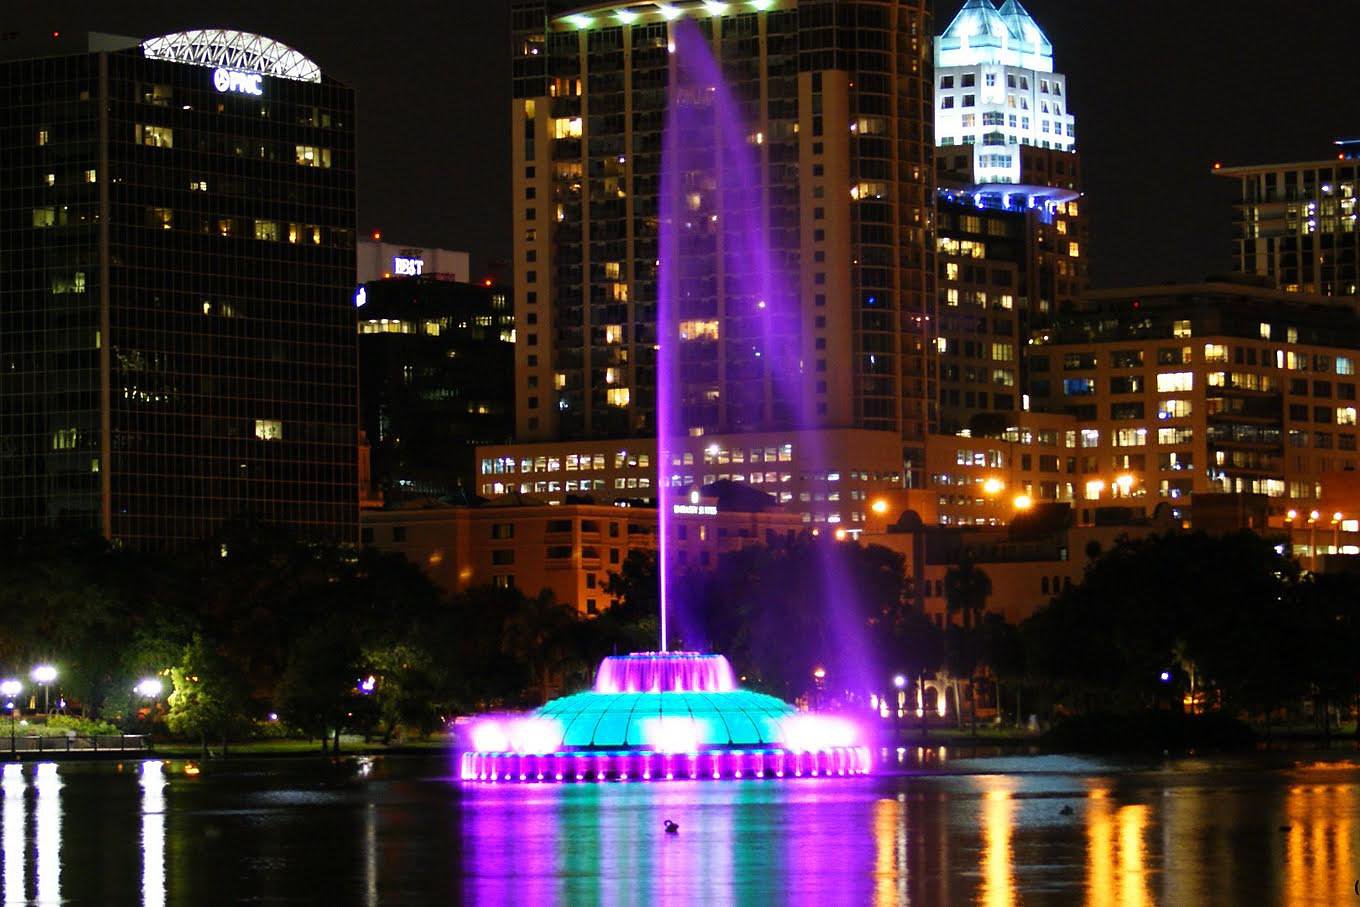 Colorful fountain display in front of buildings in downtown Orlando